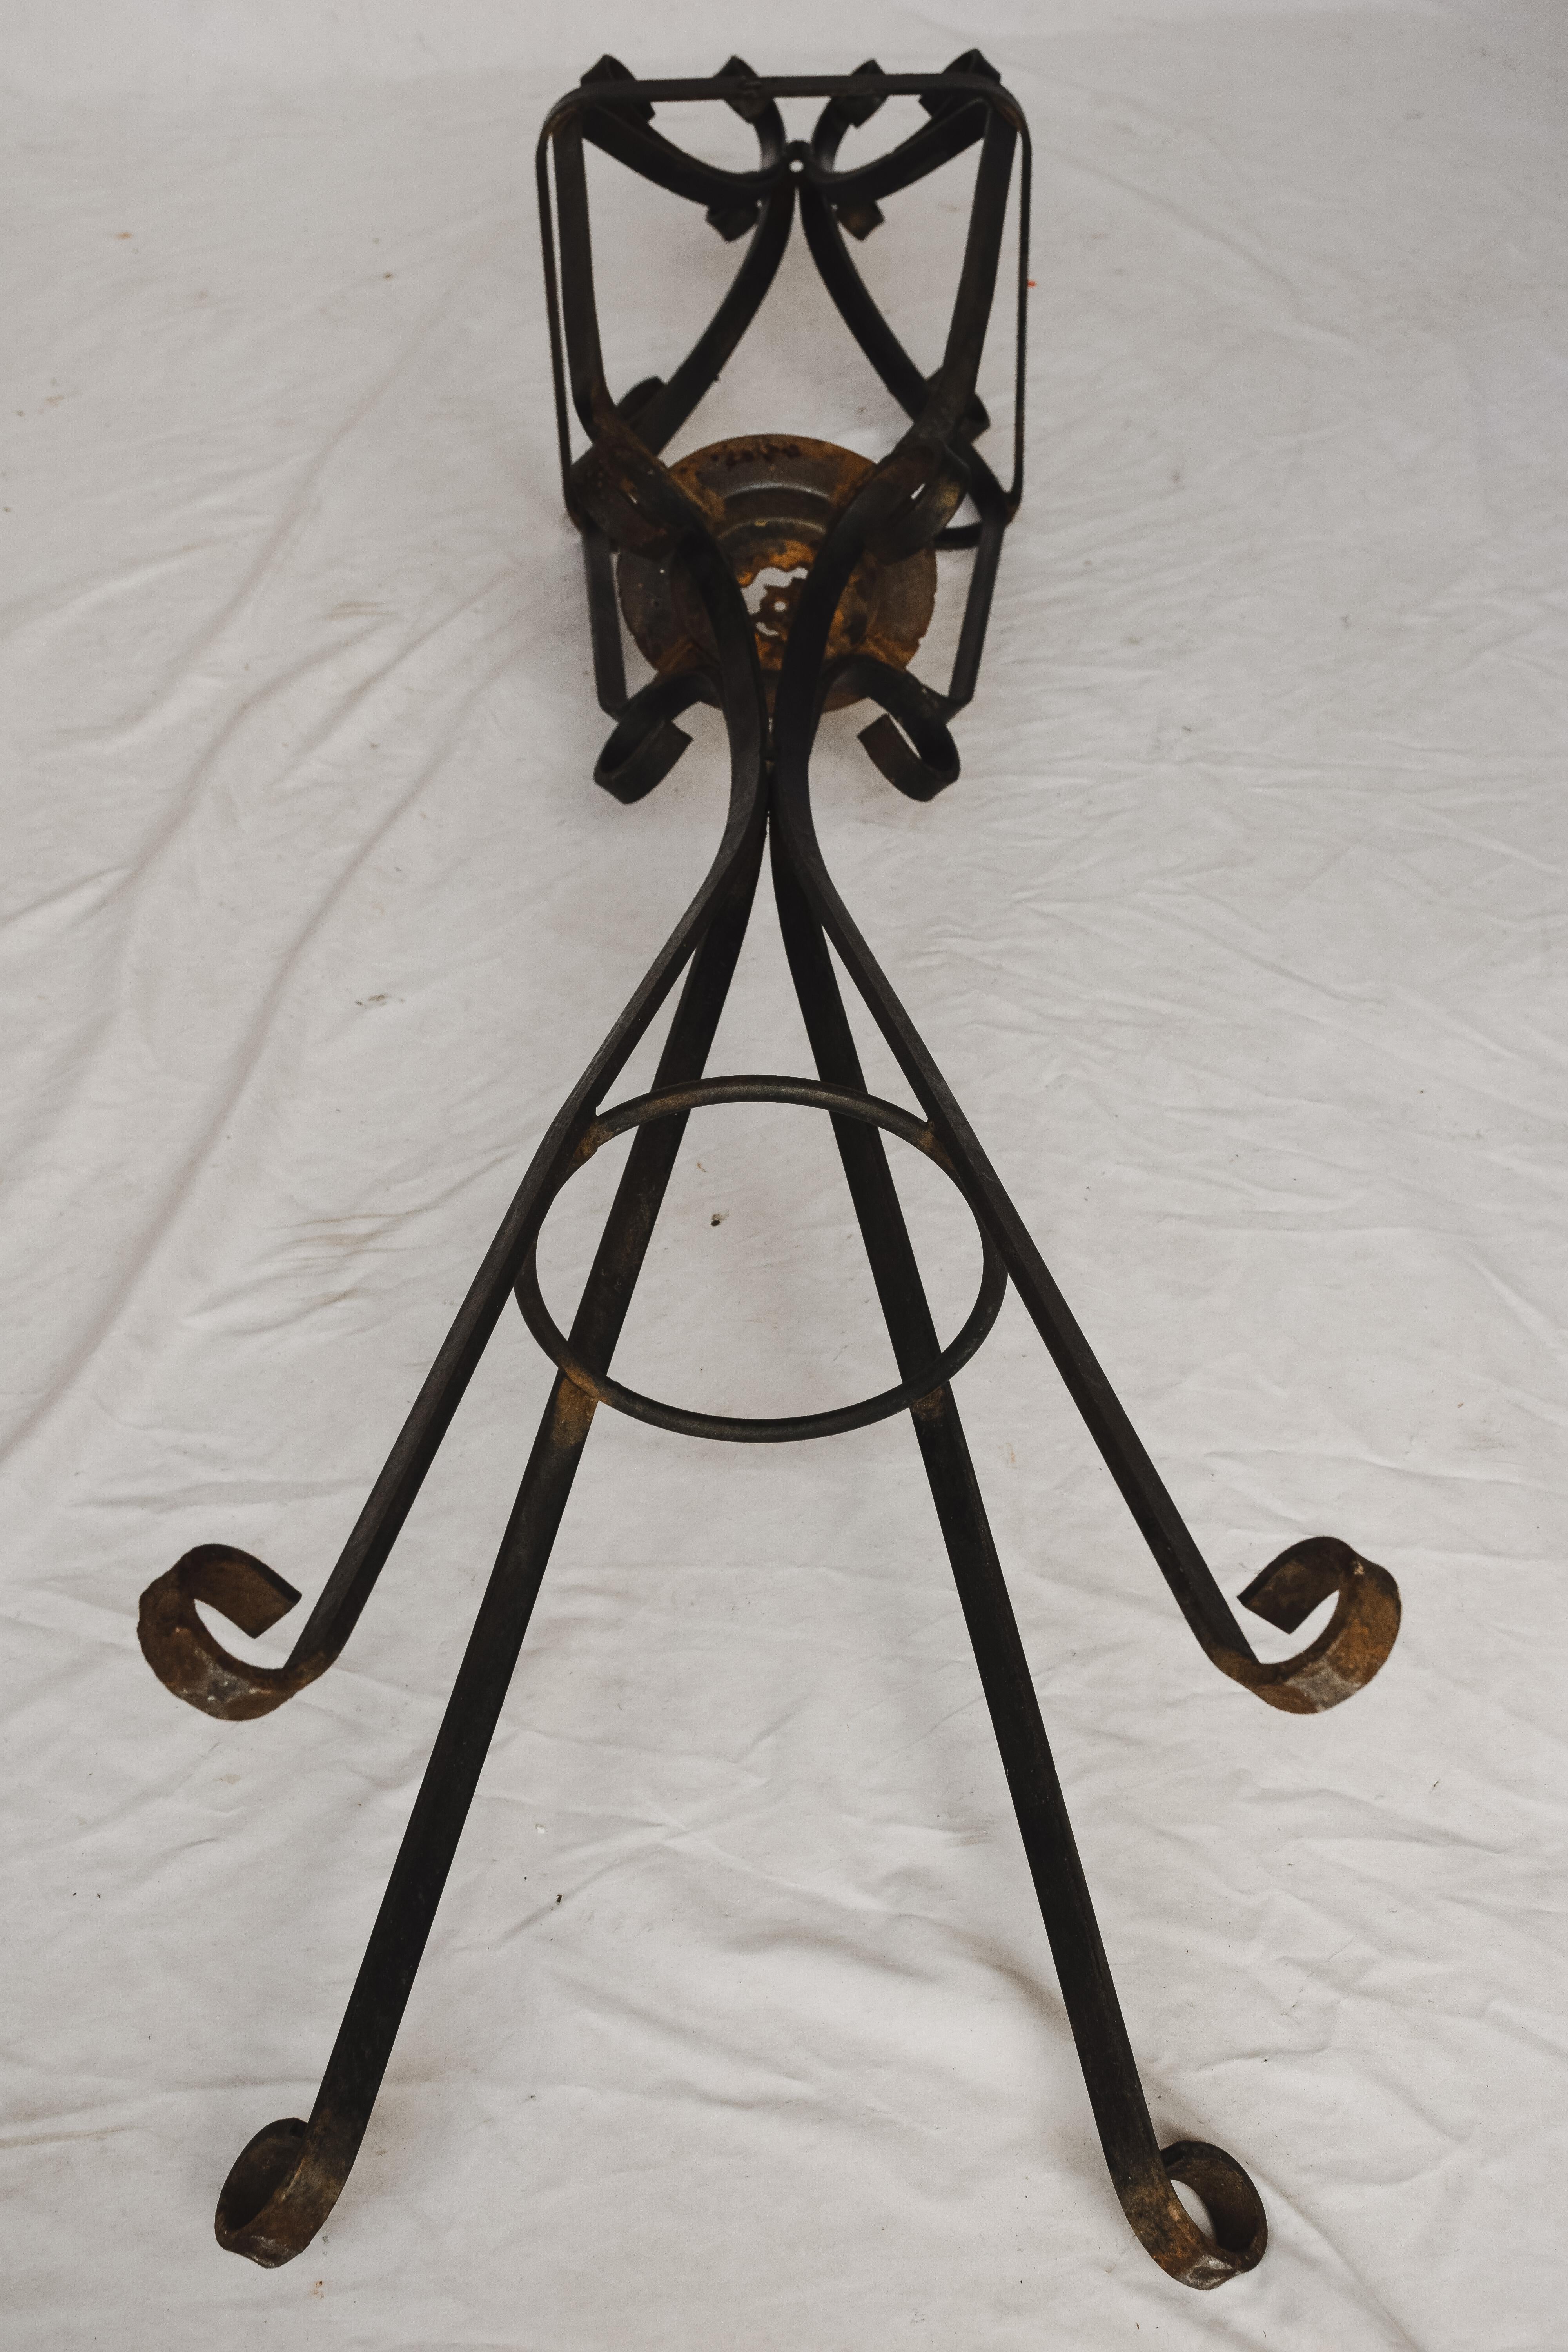 Forged in black iron this French Iron lantern stand would be perfect on a front porch as a holder for a plant or could house a candle to light up a cold autumn night. Accented with curled iron that looks like ribbon and a sturdy four legged